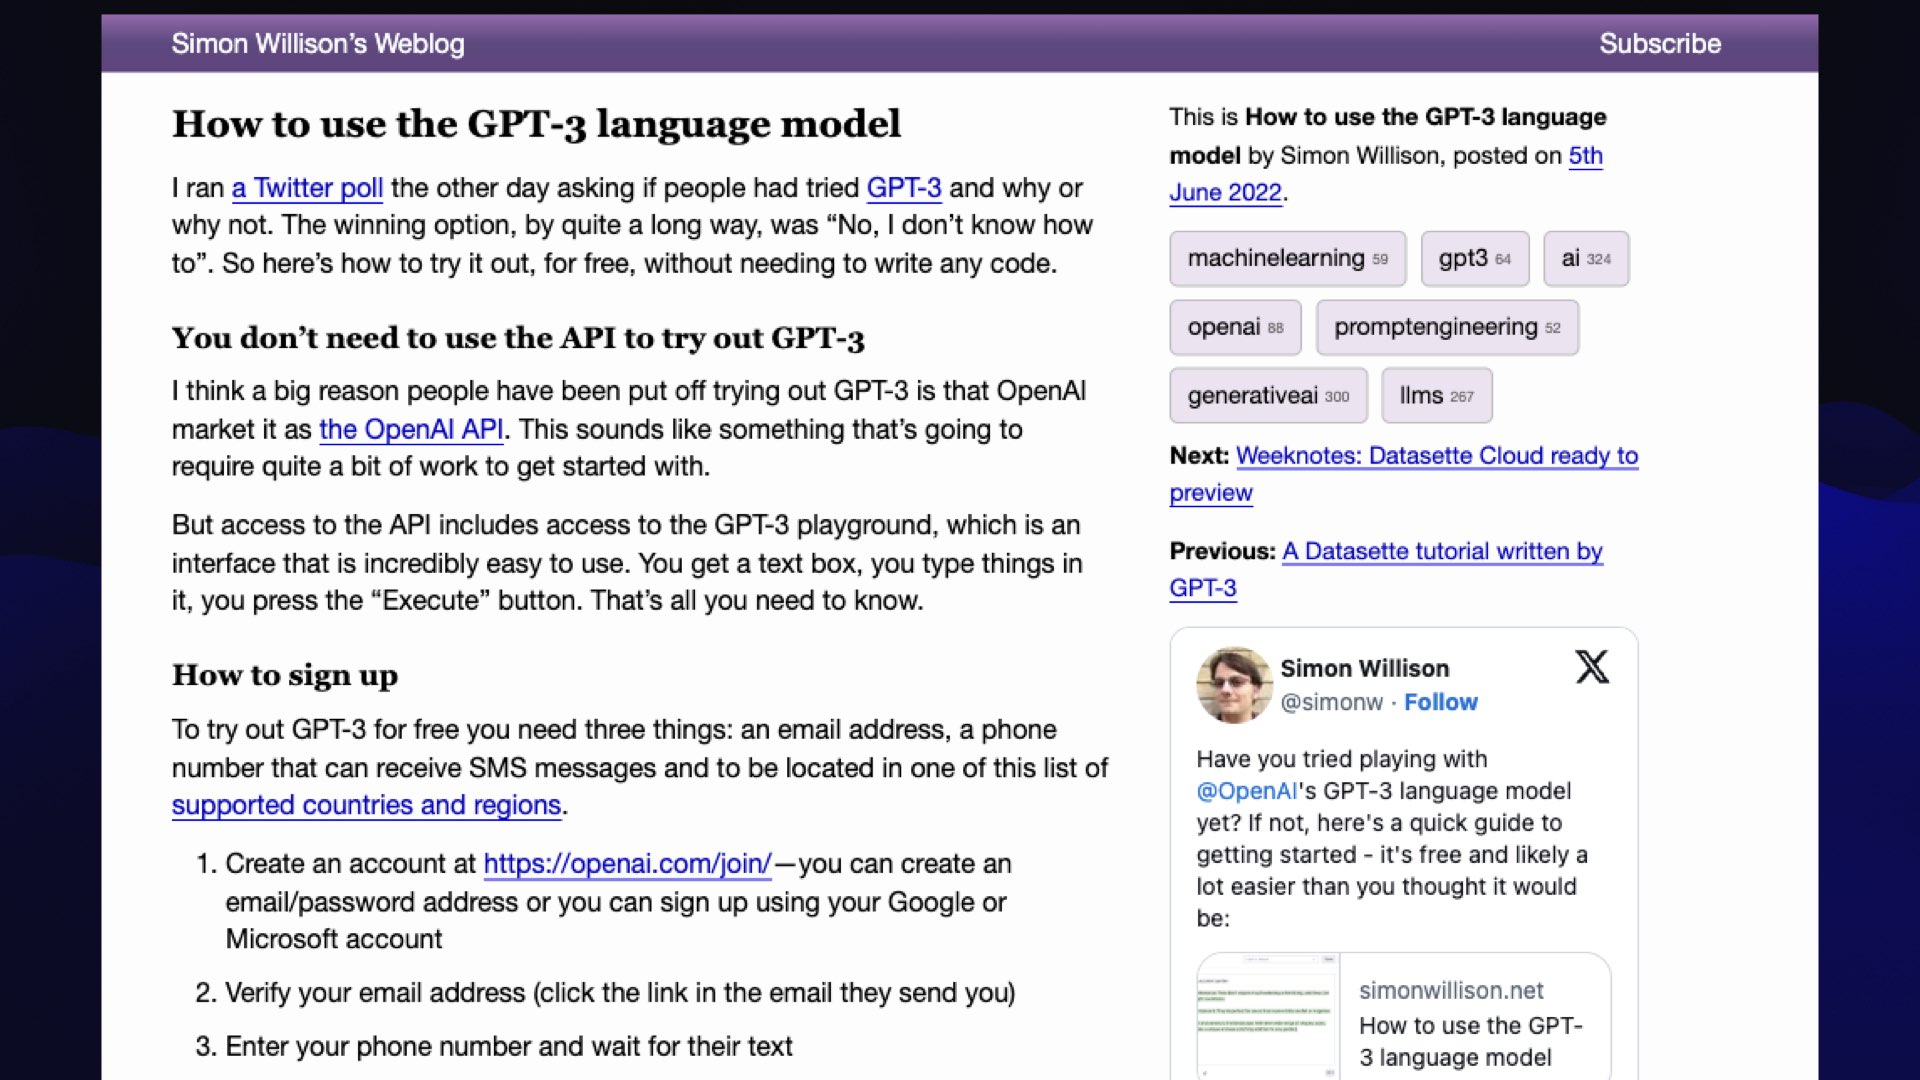 Simon Willison’s Weblog  How to use the GPT-3 language model, posted on 5th June 2022.